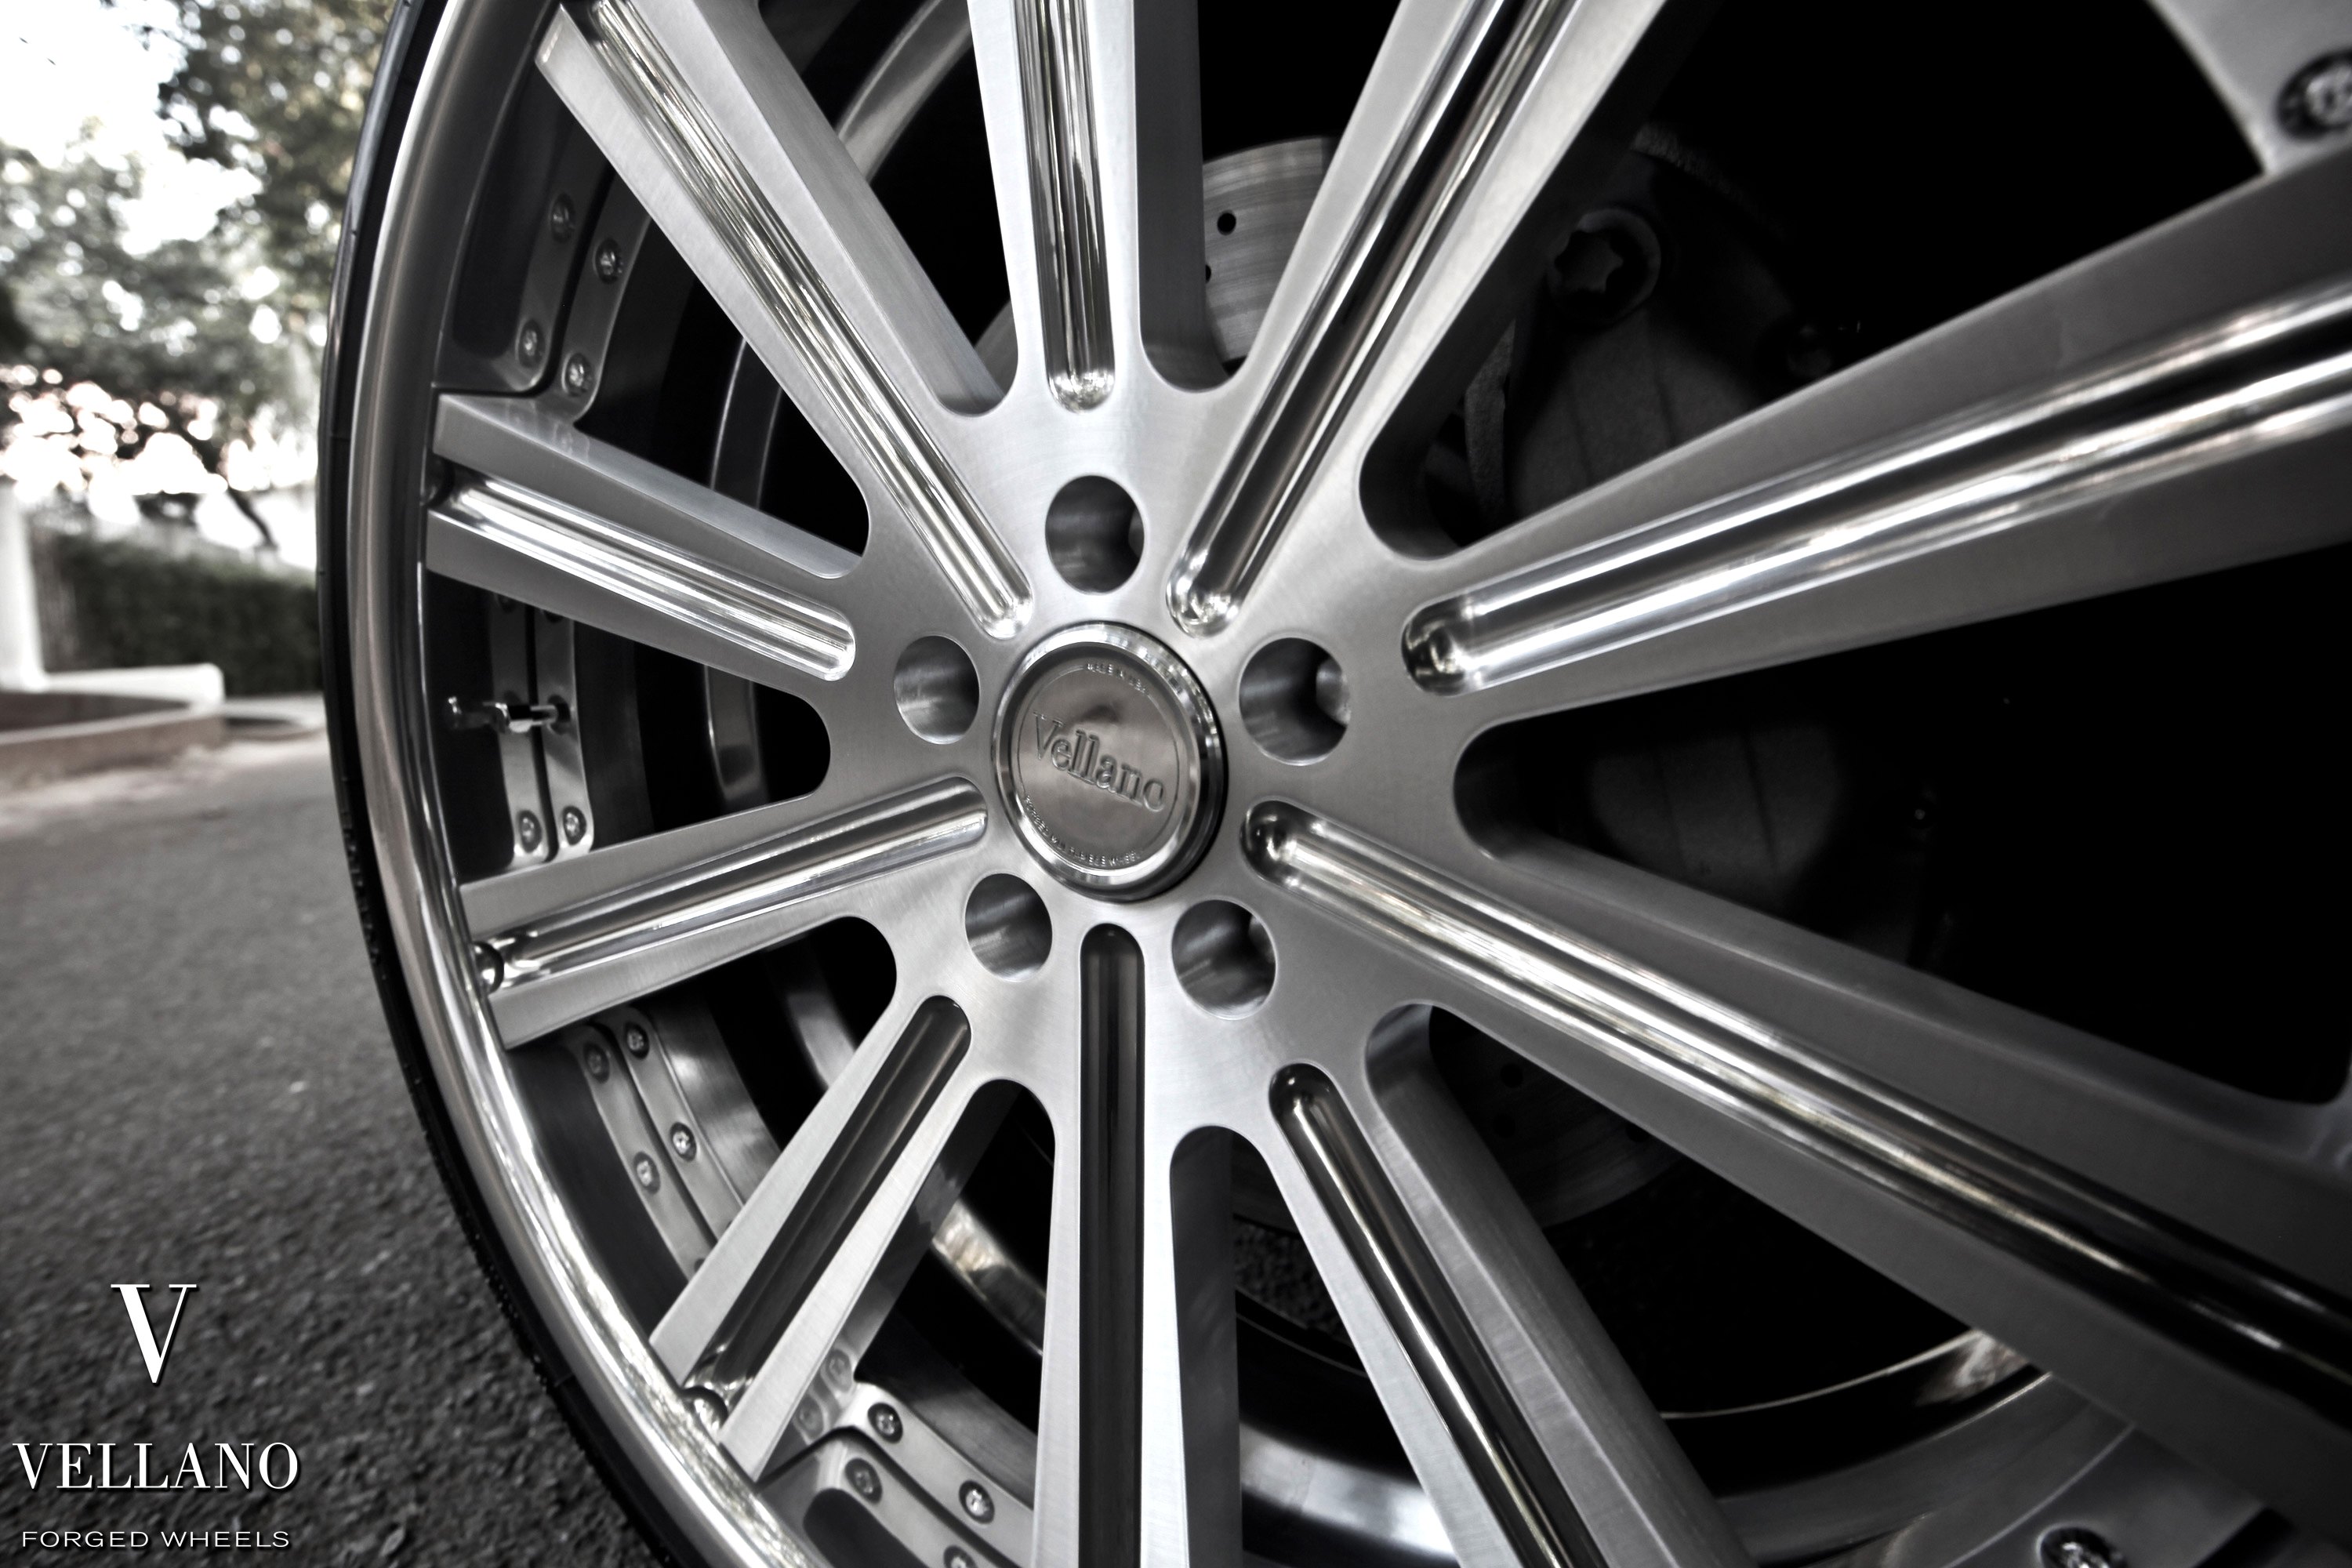 Chrome Forged Vellano Rims on Black Mercedes S-Class - Photo by Vellano